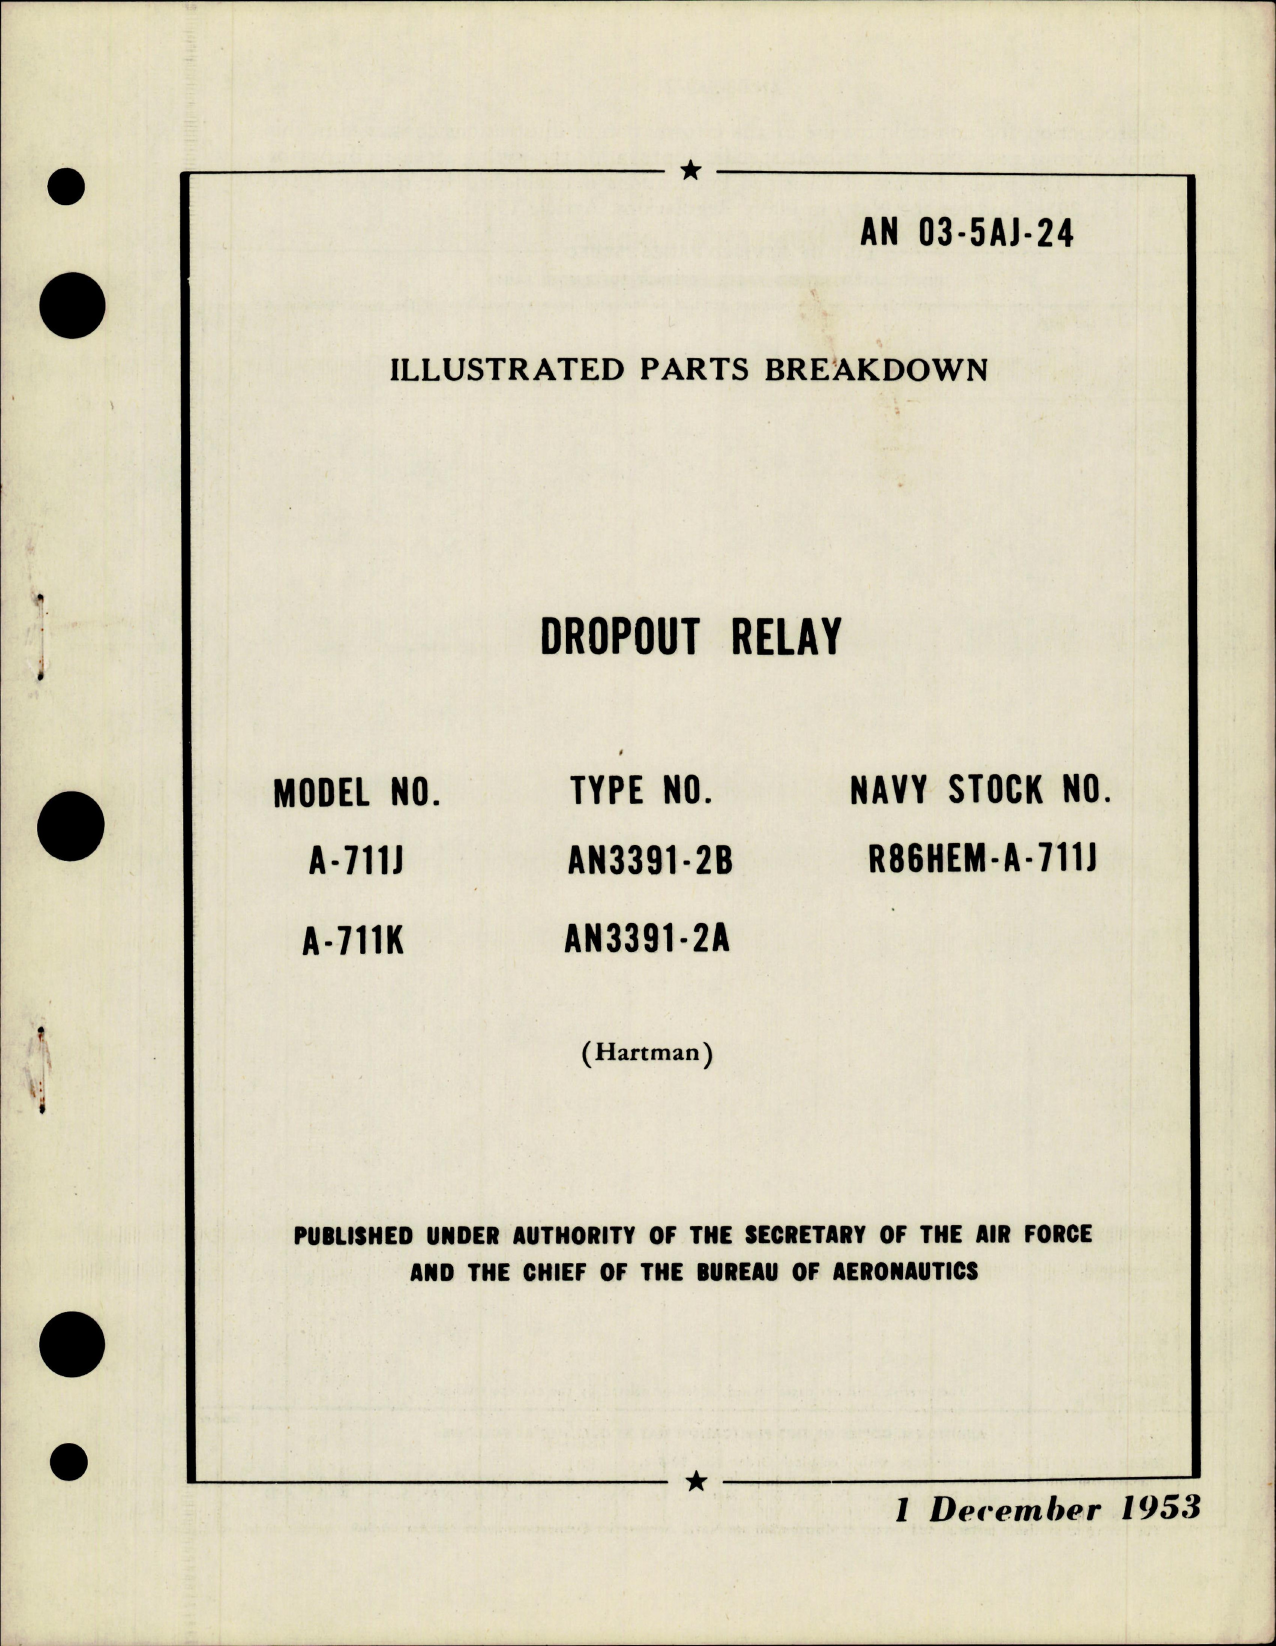 Sample page 1 from AirCorps Library document: Illustrated Parts Breakdown for Dropout Relay - Models A-711J and A-711K  - Type AN3391-2B and AN3391-2A